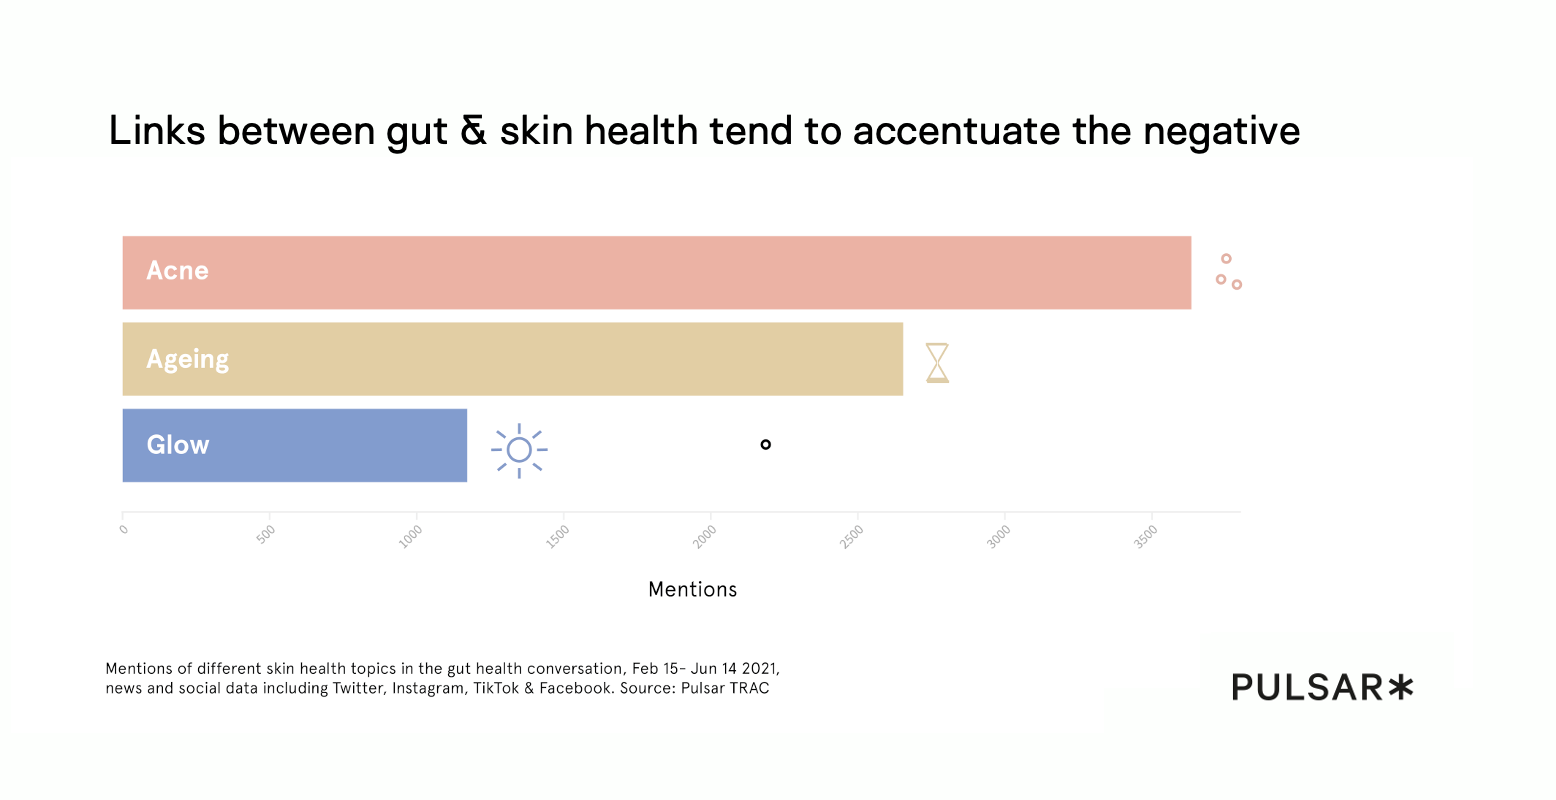 Links between gut & skin health tend to accentuate the negative